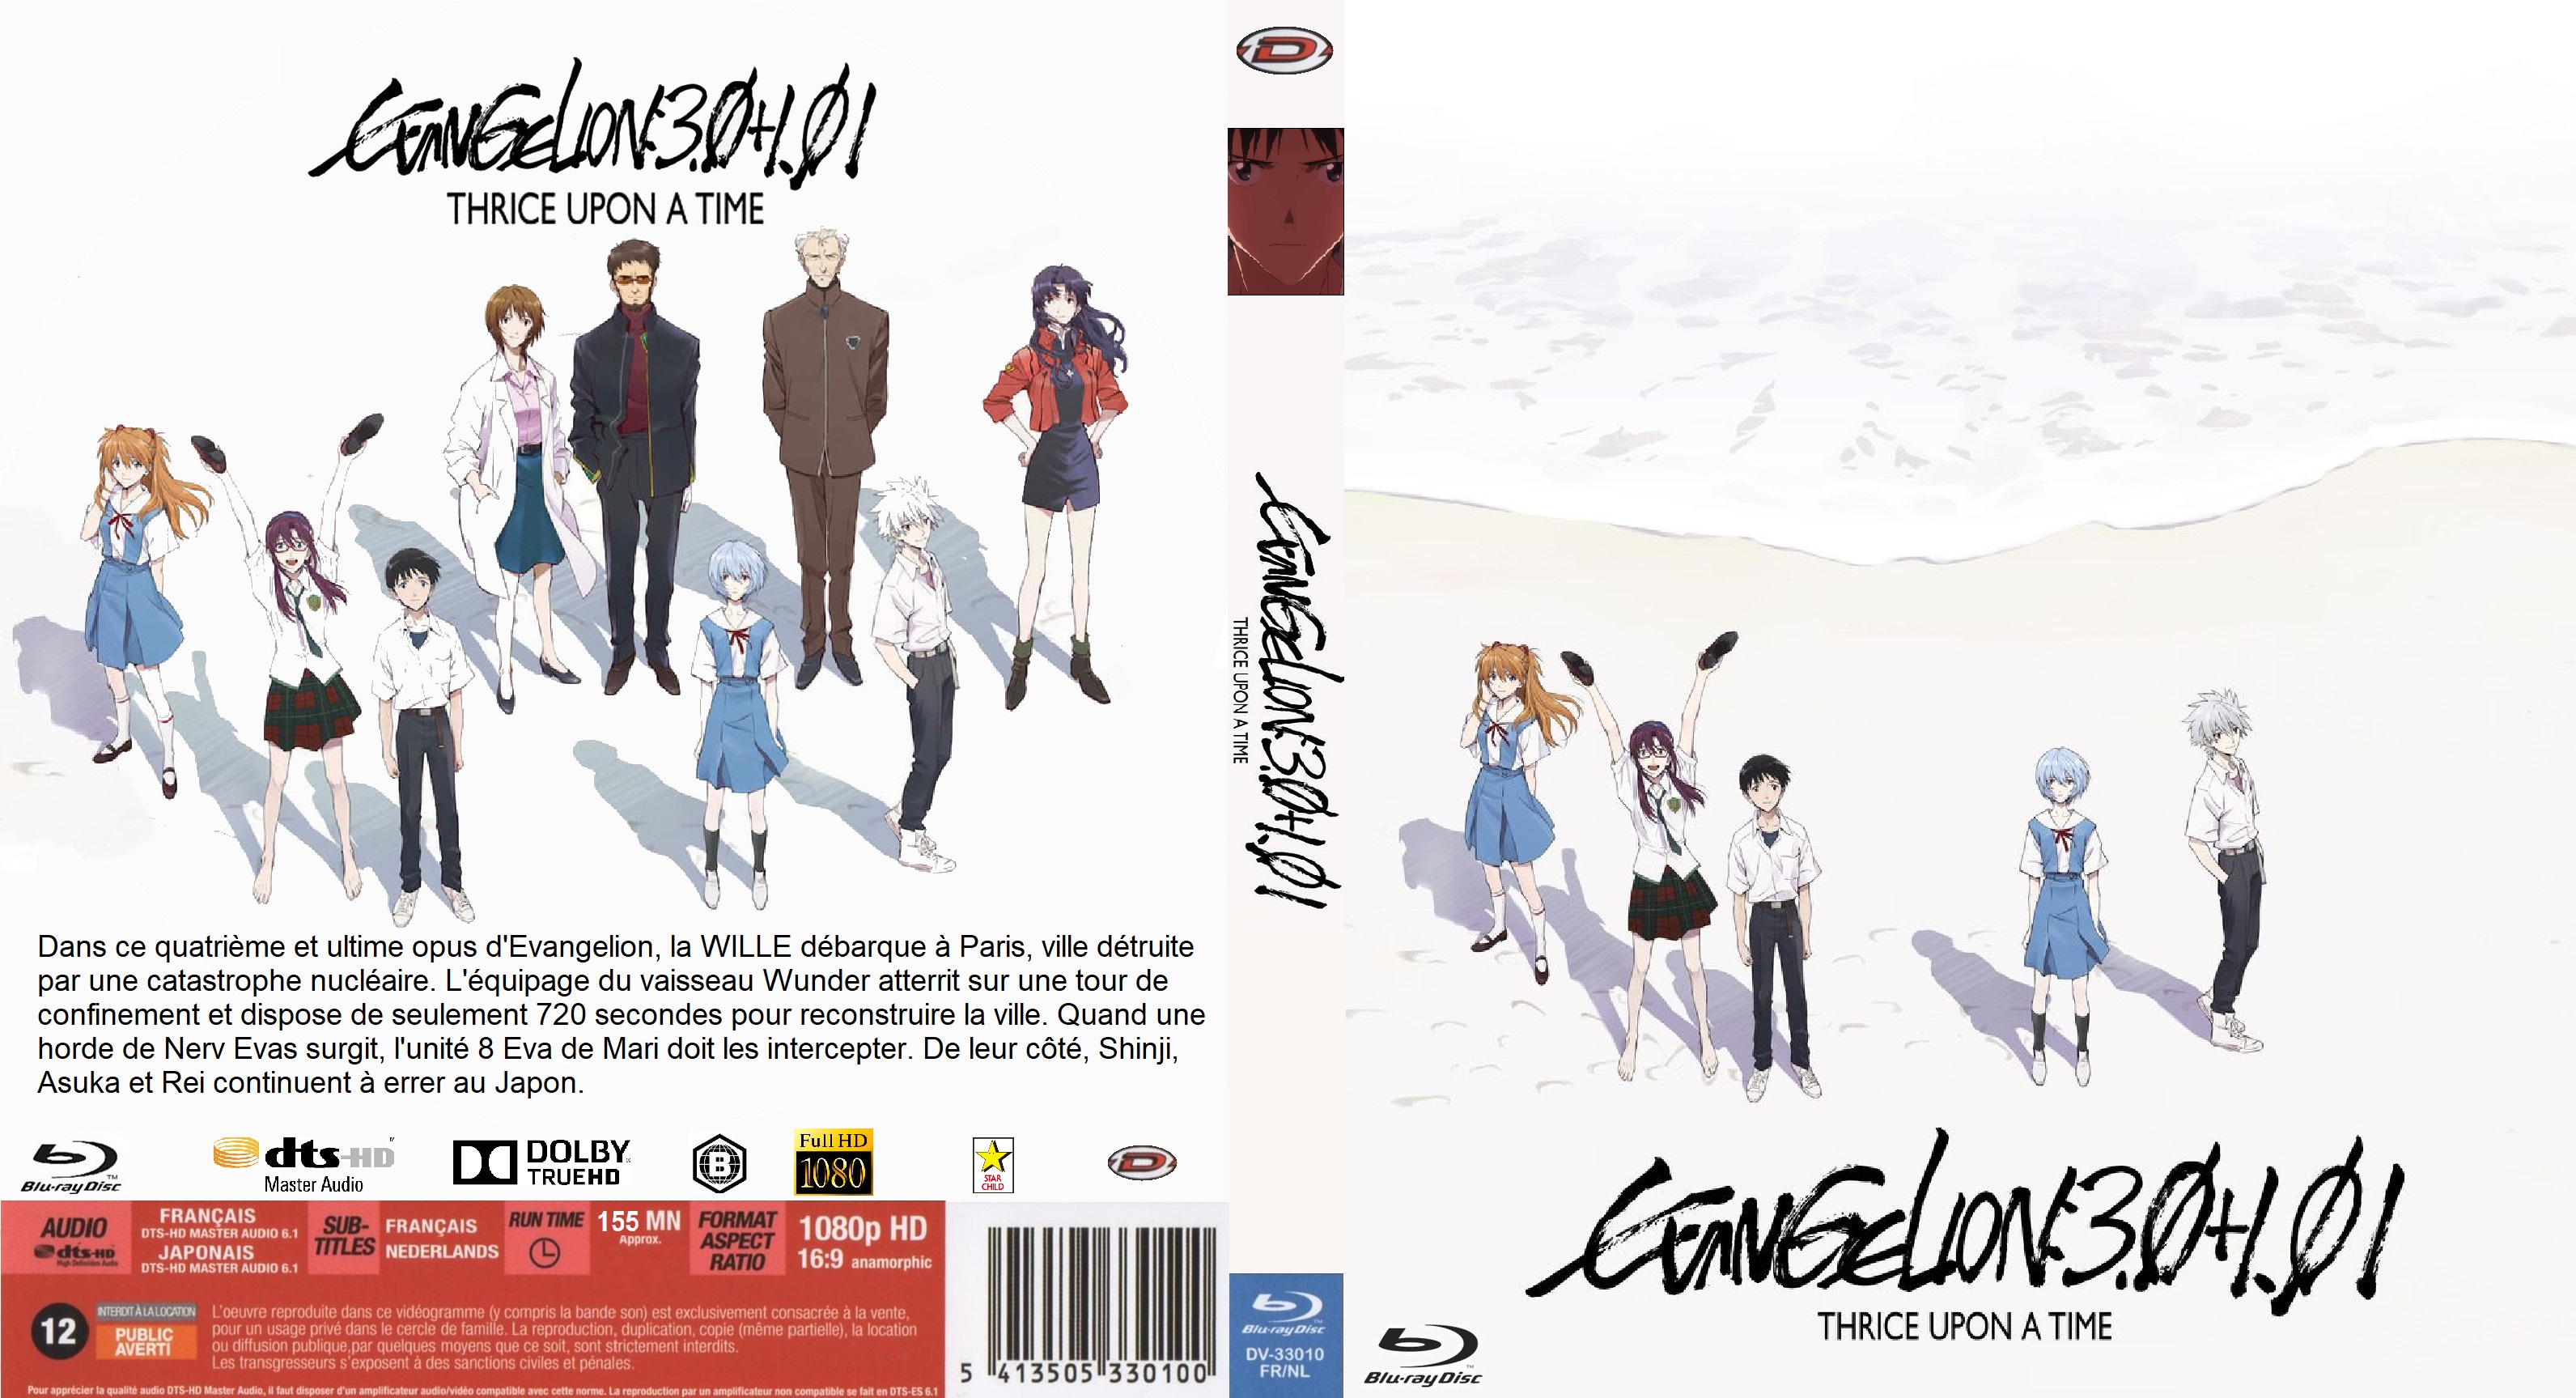 Jaquette DVD Evangelion 3 0 1 01 Thrice upon a time  BLU RAY custom